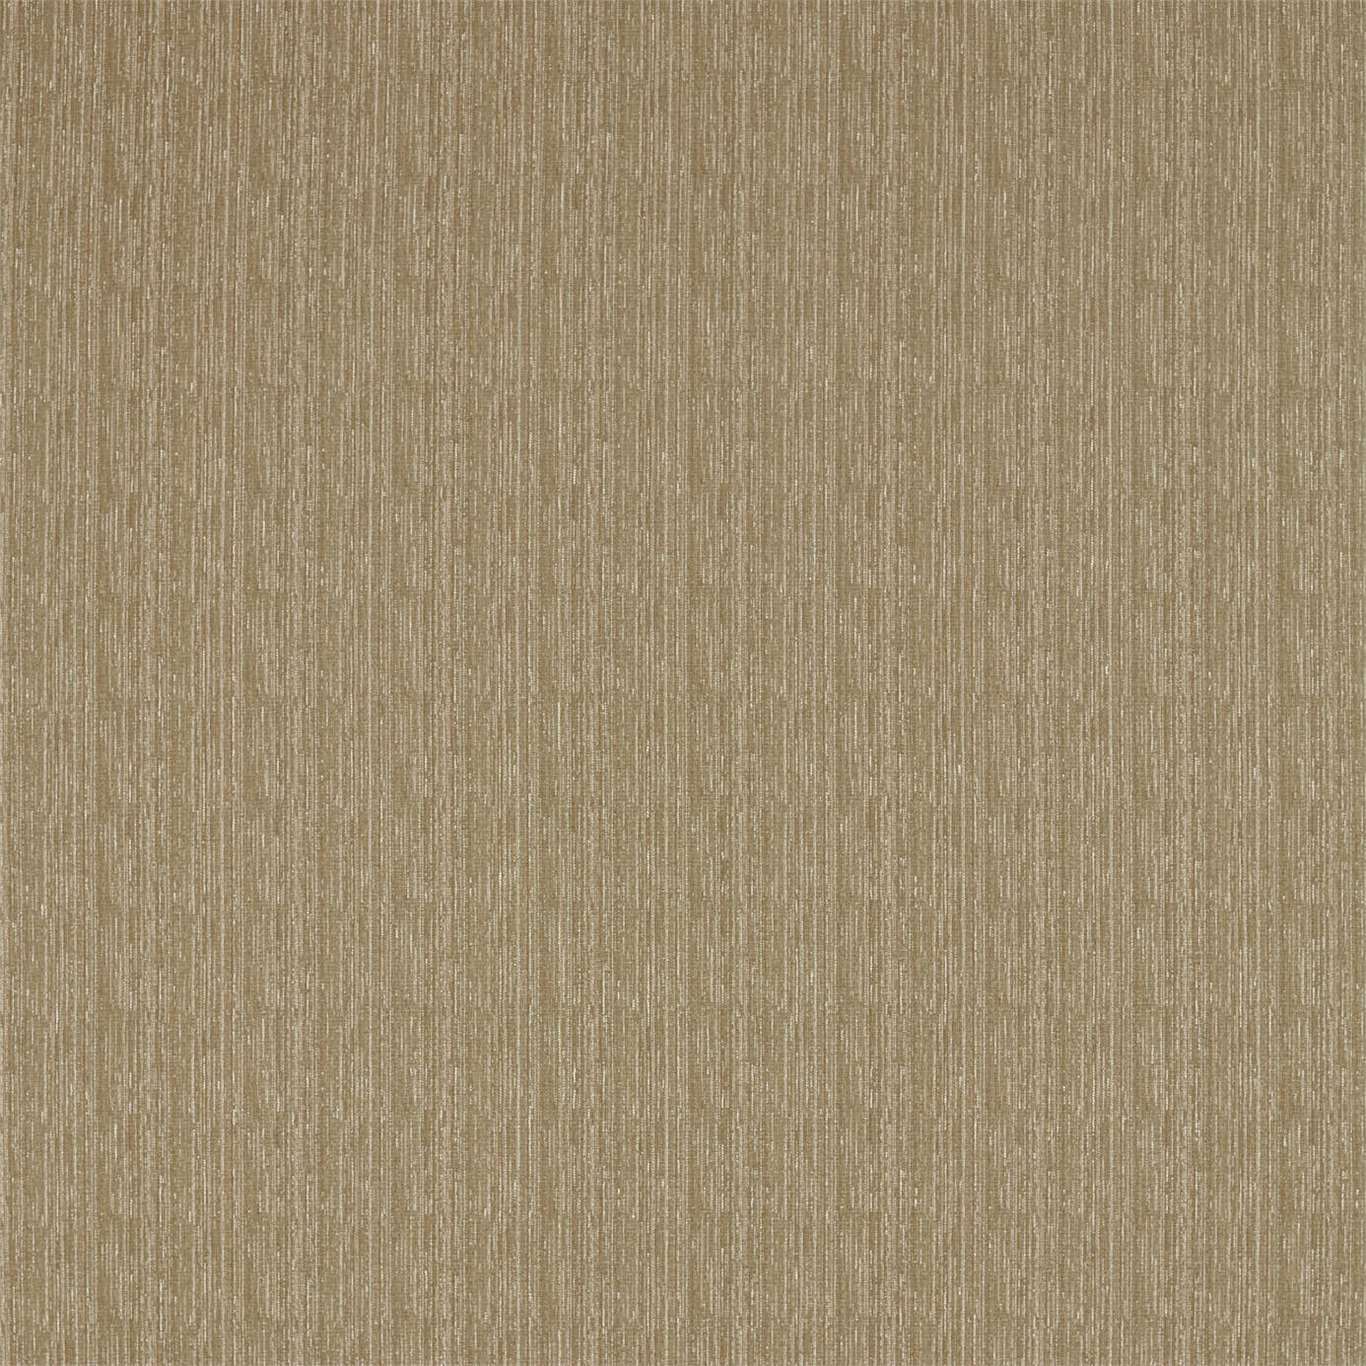 Spindlestone Gold Fabric by SAN